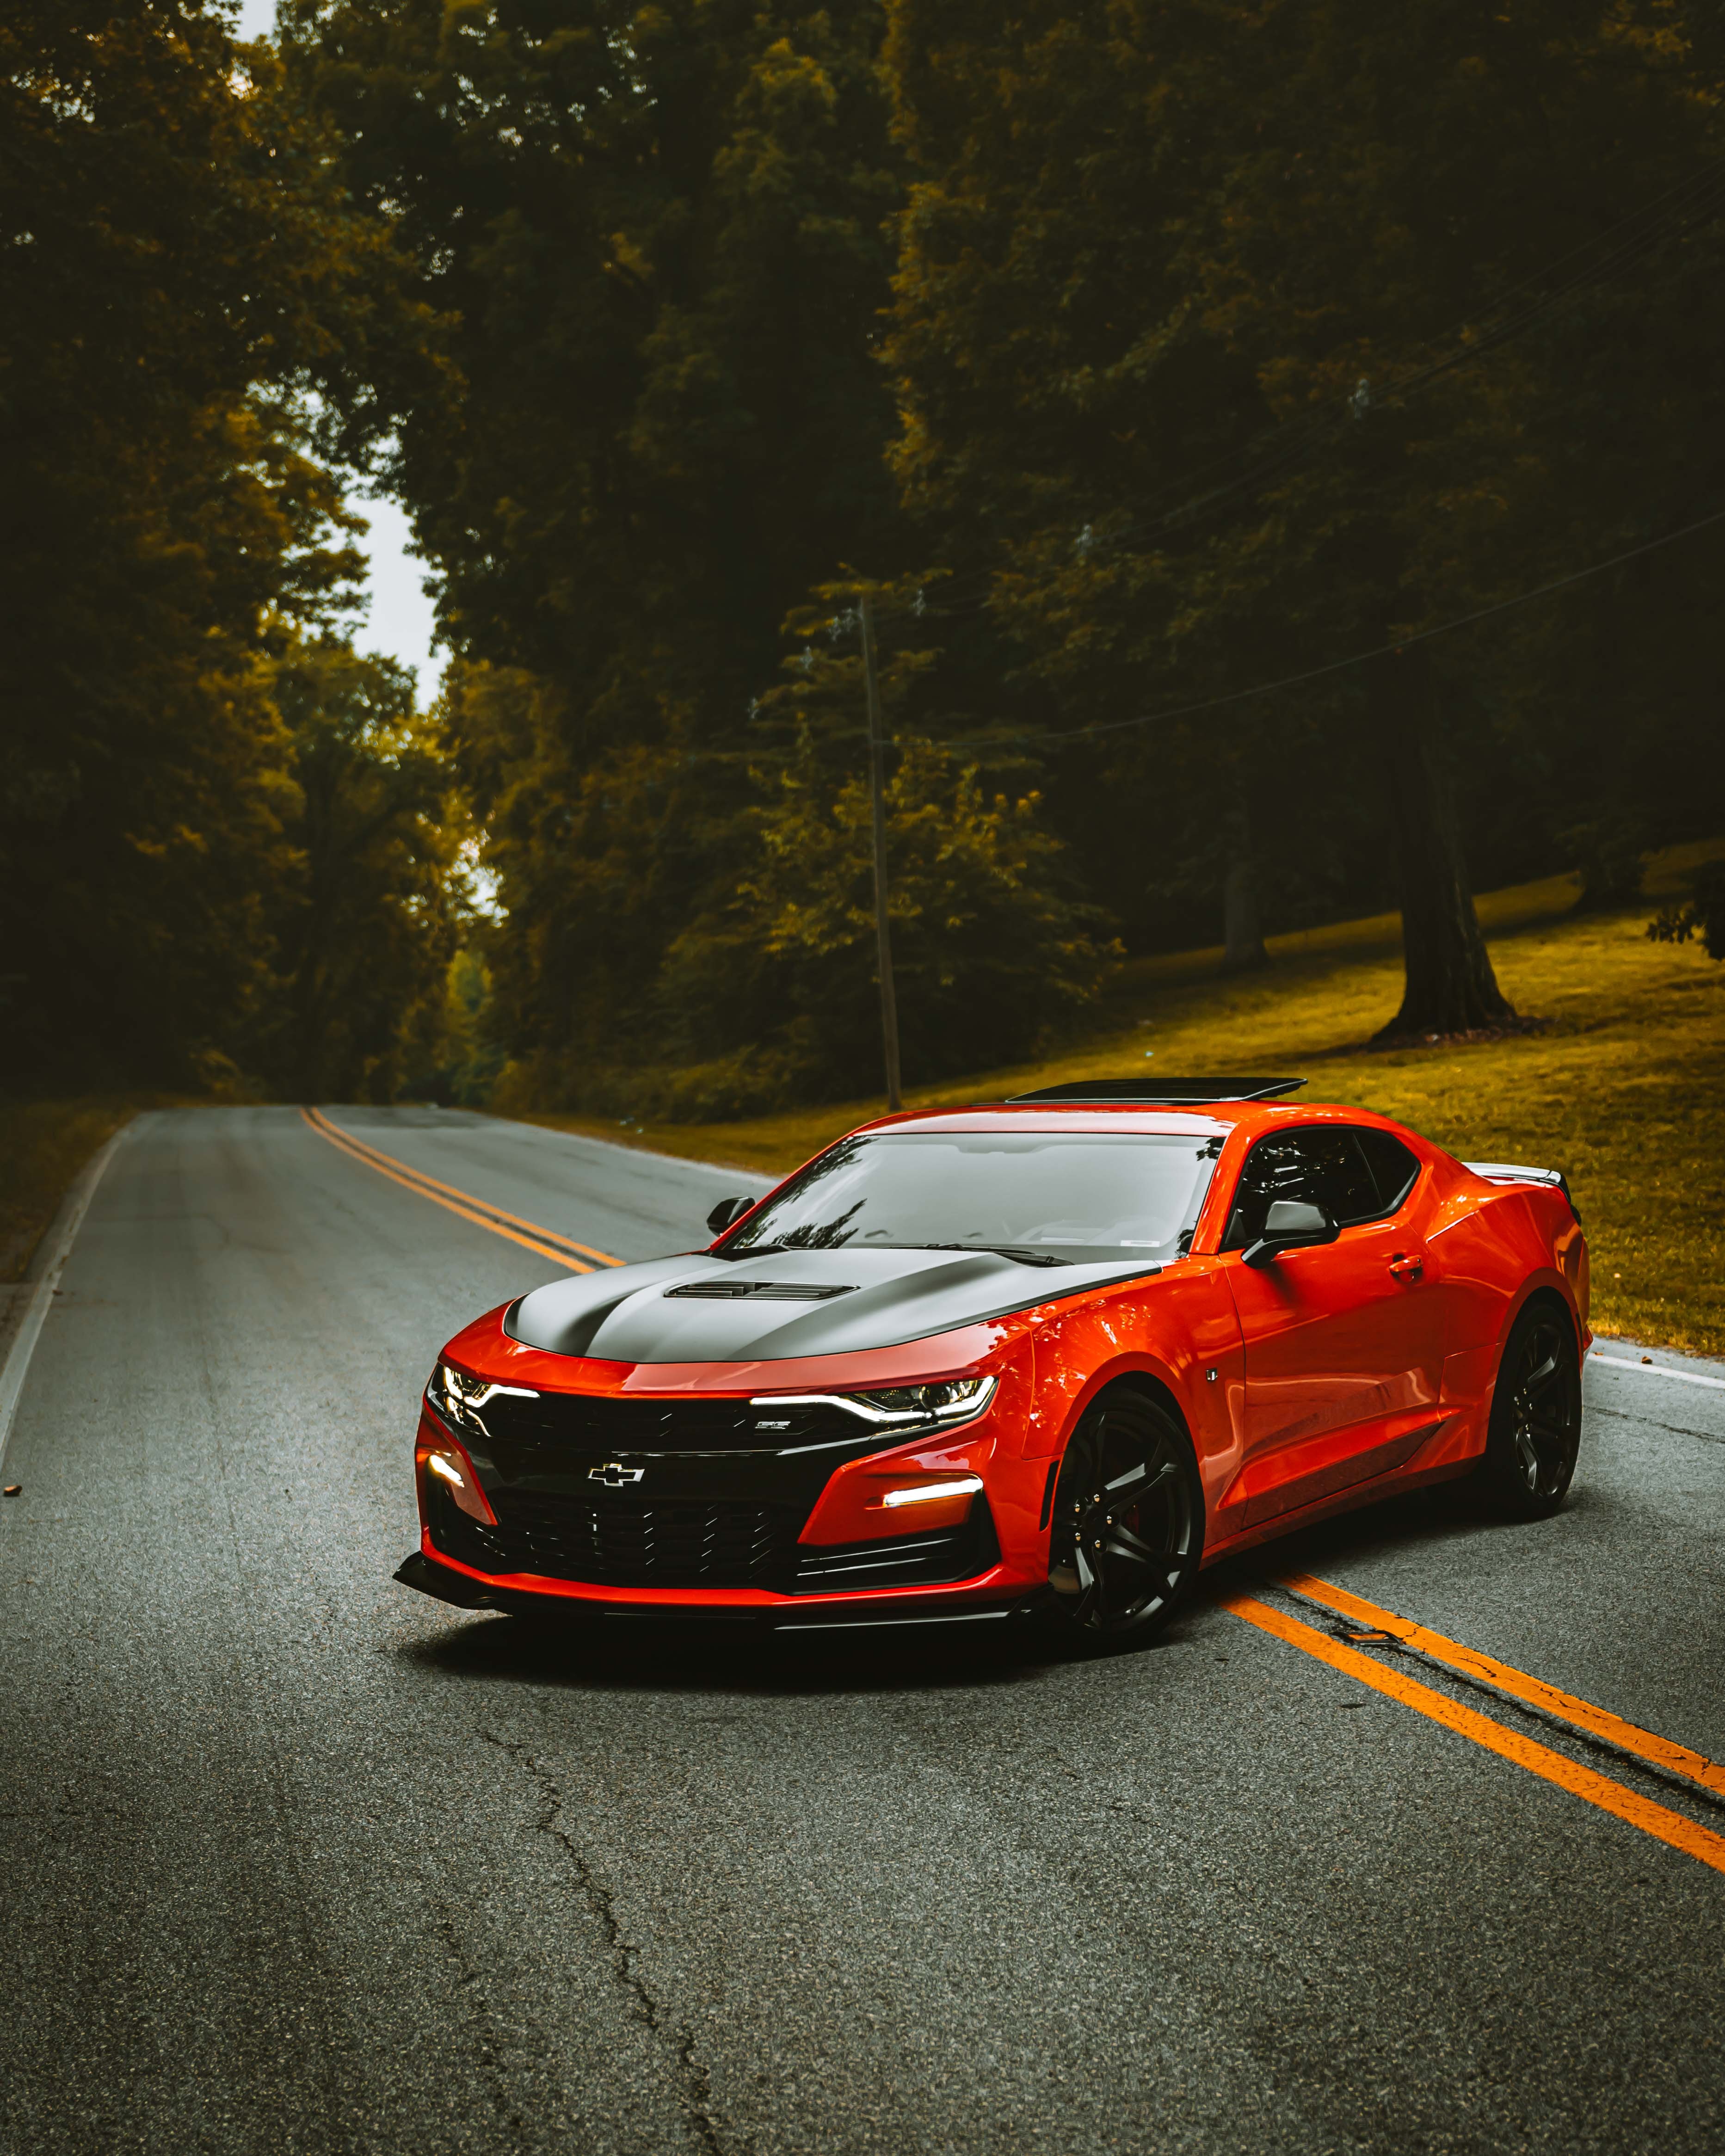 chevrolet, machine, chevrolet camaro, car, cars, sports car, sports, red, road wallpaper for mobile